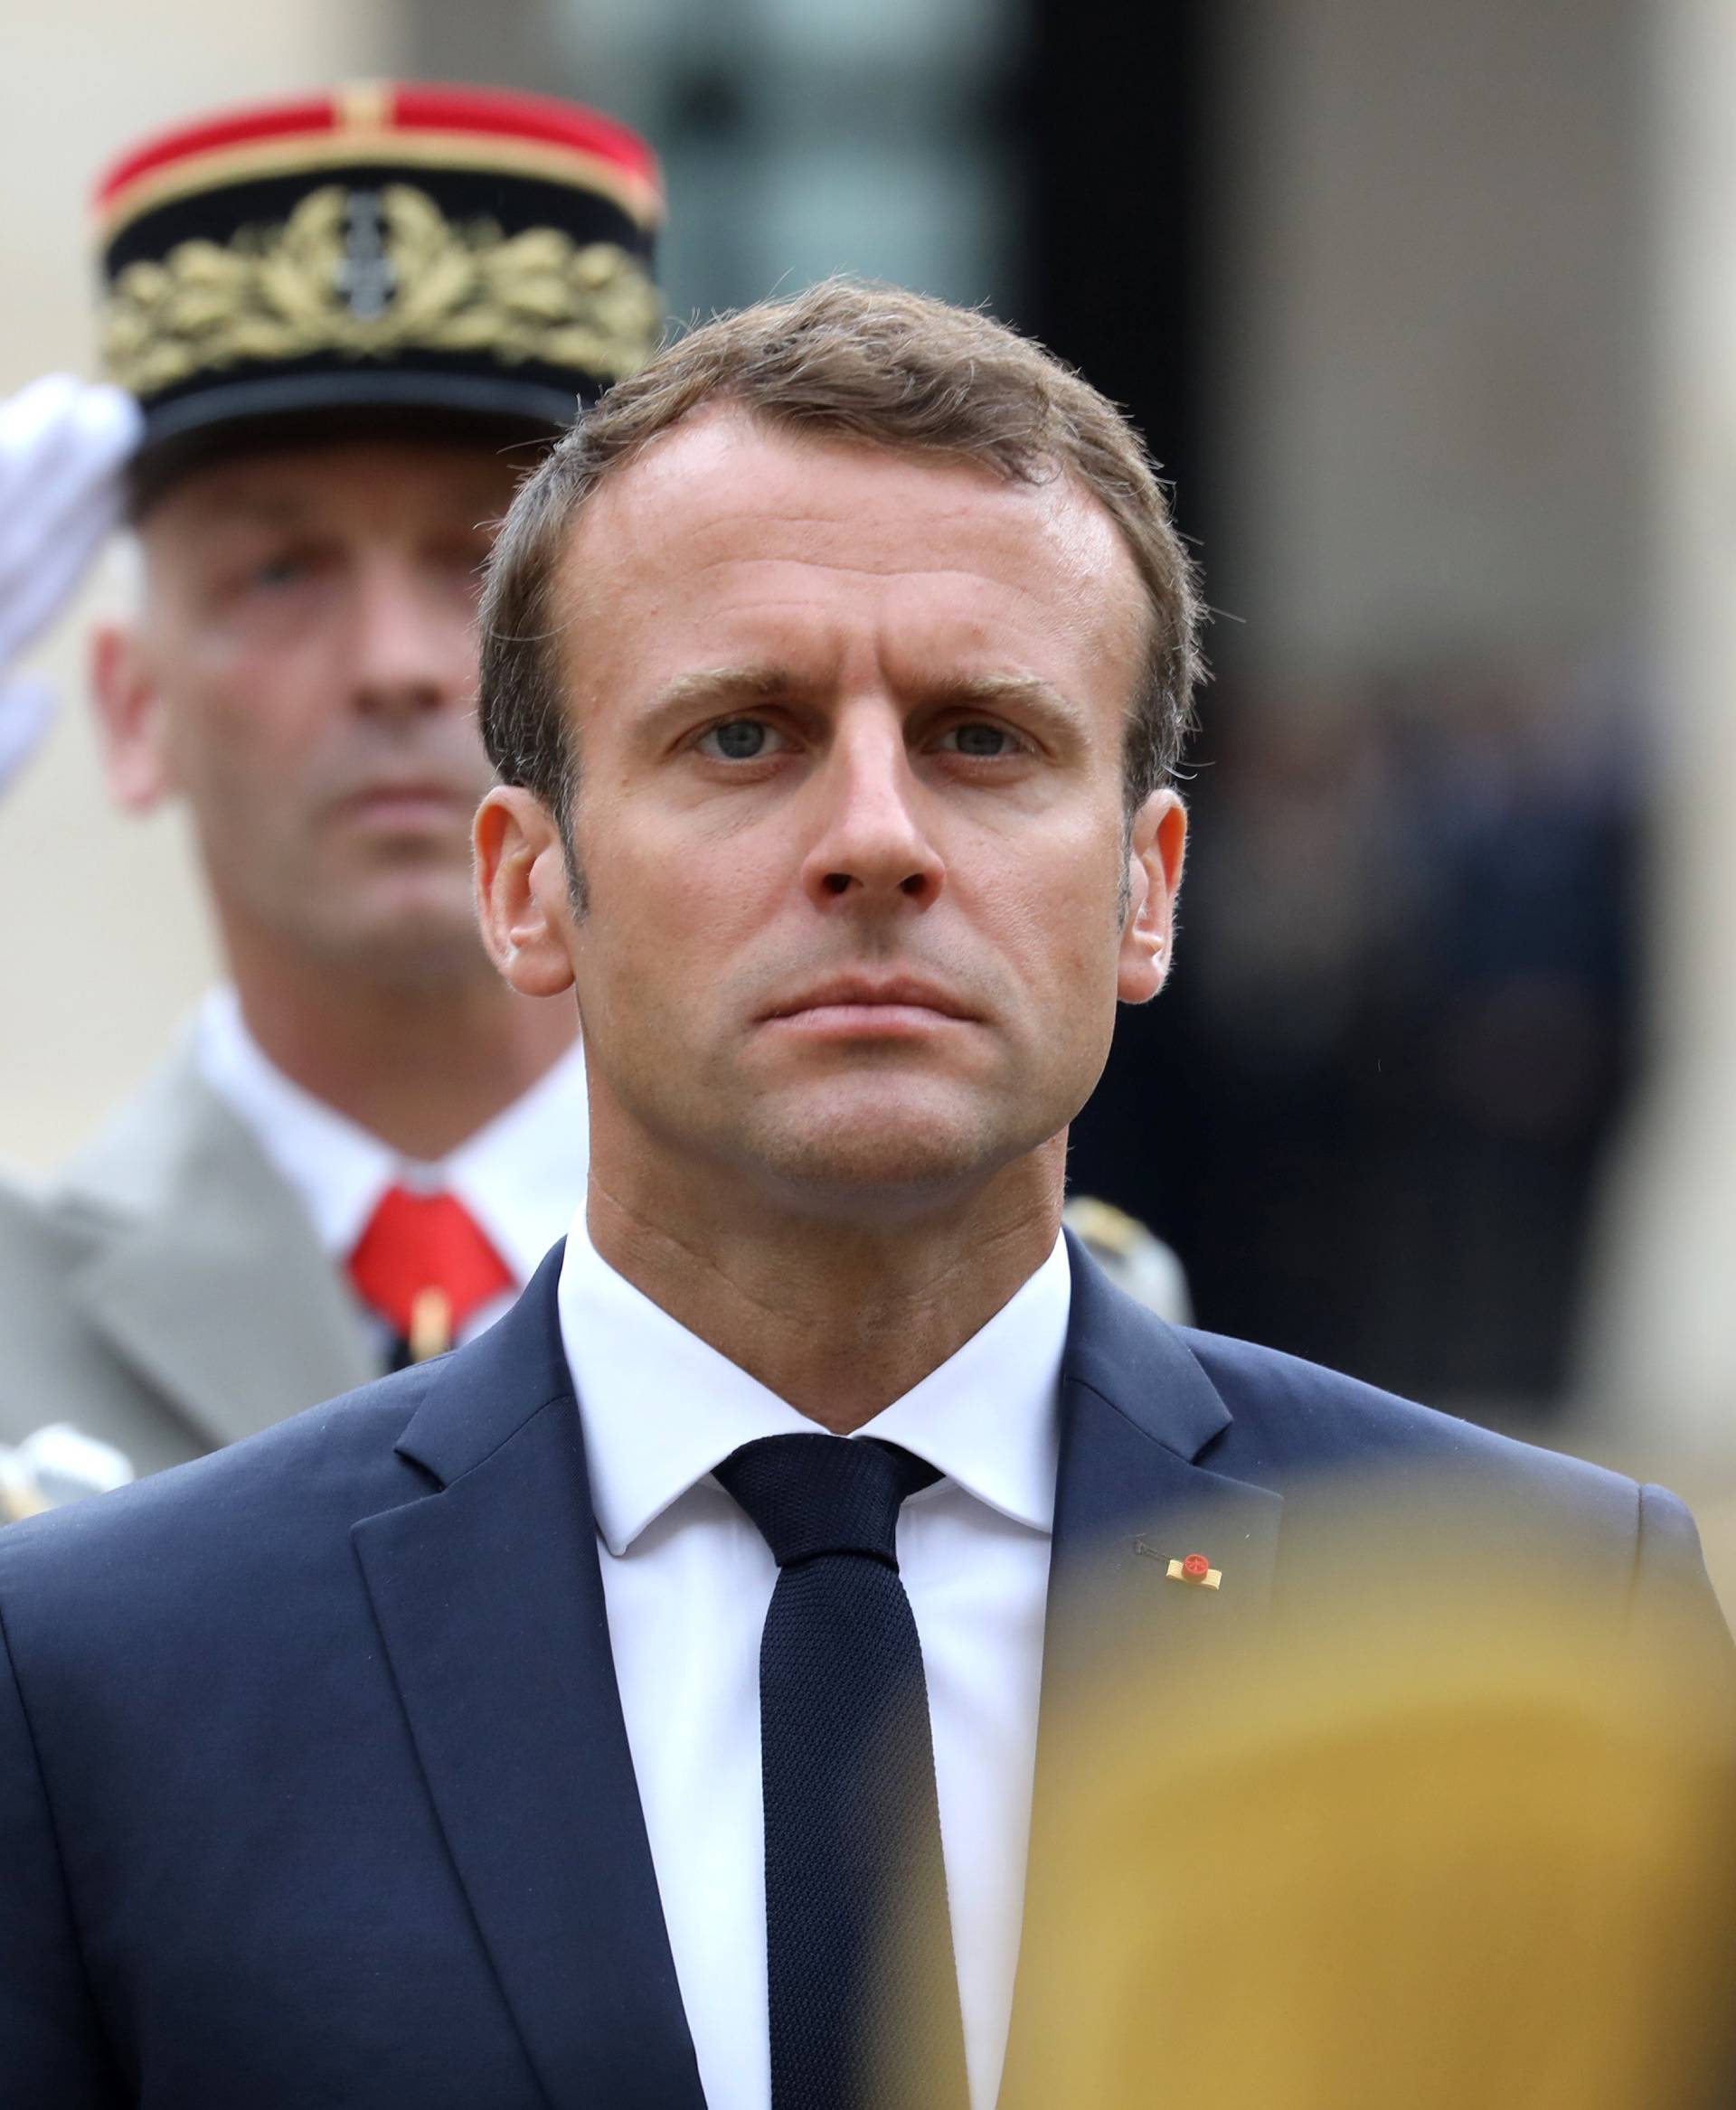 French President Emmanuel Macron attends the "prise d'armes" military ceremony at the Invalides in Paris